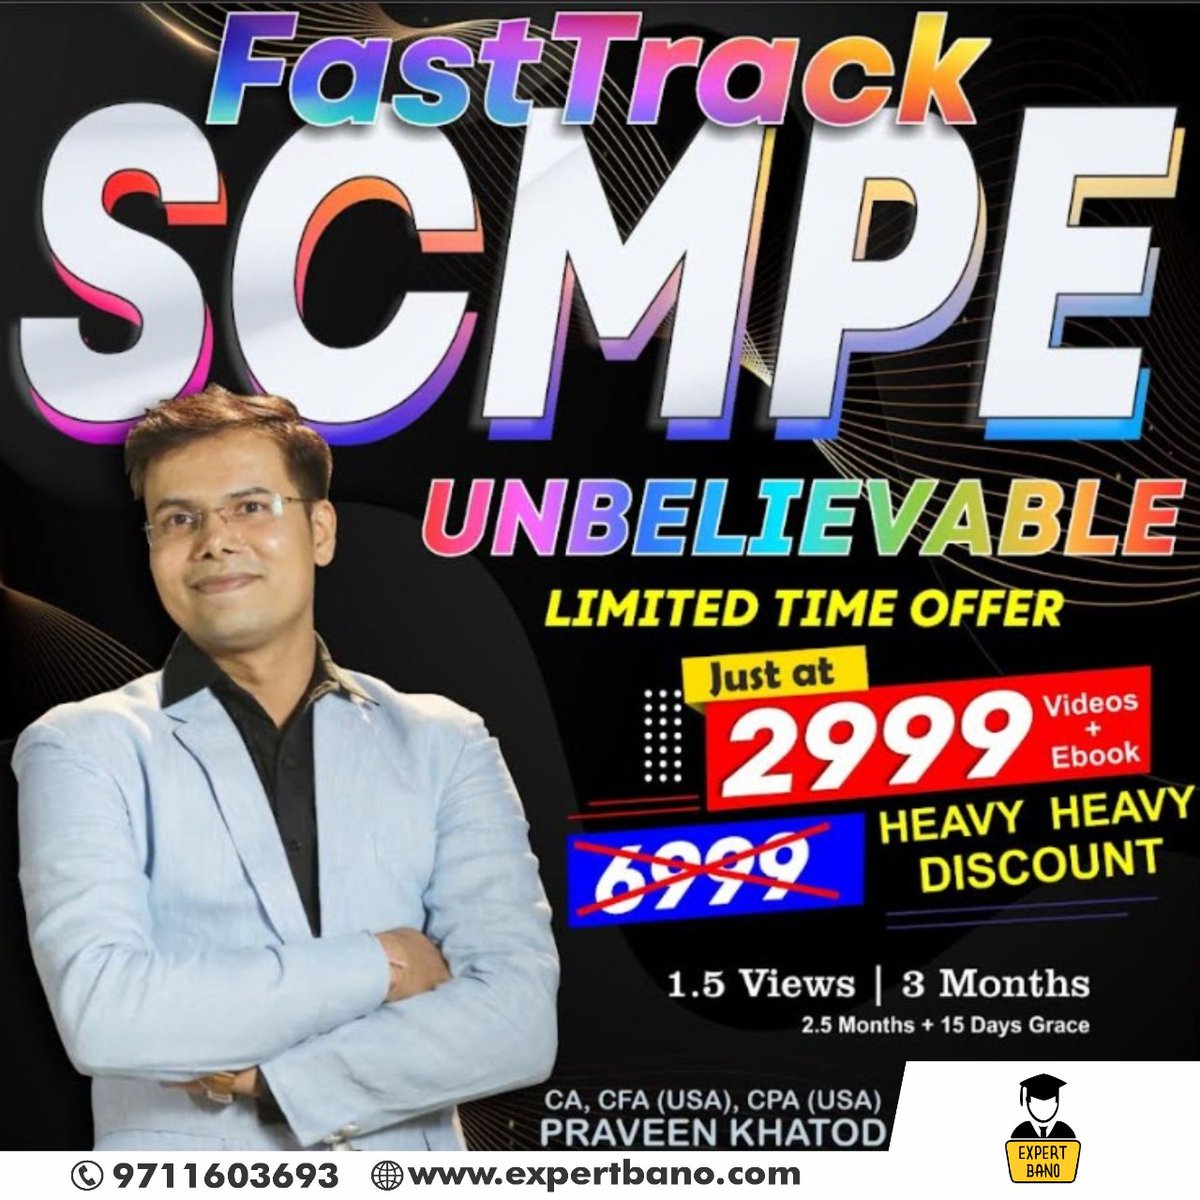 Unbelievable offer on CA Final SCMPE Fast track (Compact) By CA Praveen Khatod.
To buy, Pls Visit: bit.ly/35hYrc9 
call 971603693 for inquiries.
#cafinal #capraveenkhatod #cafinalscmpe #cafinalscmpefasttrack #cafinalfasttrackcourse #CAFinalGroup2